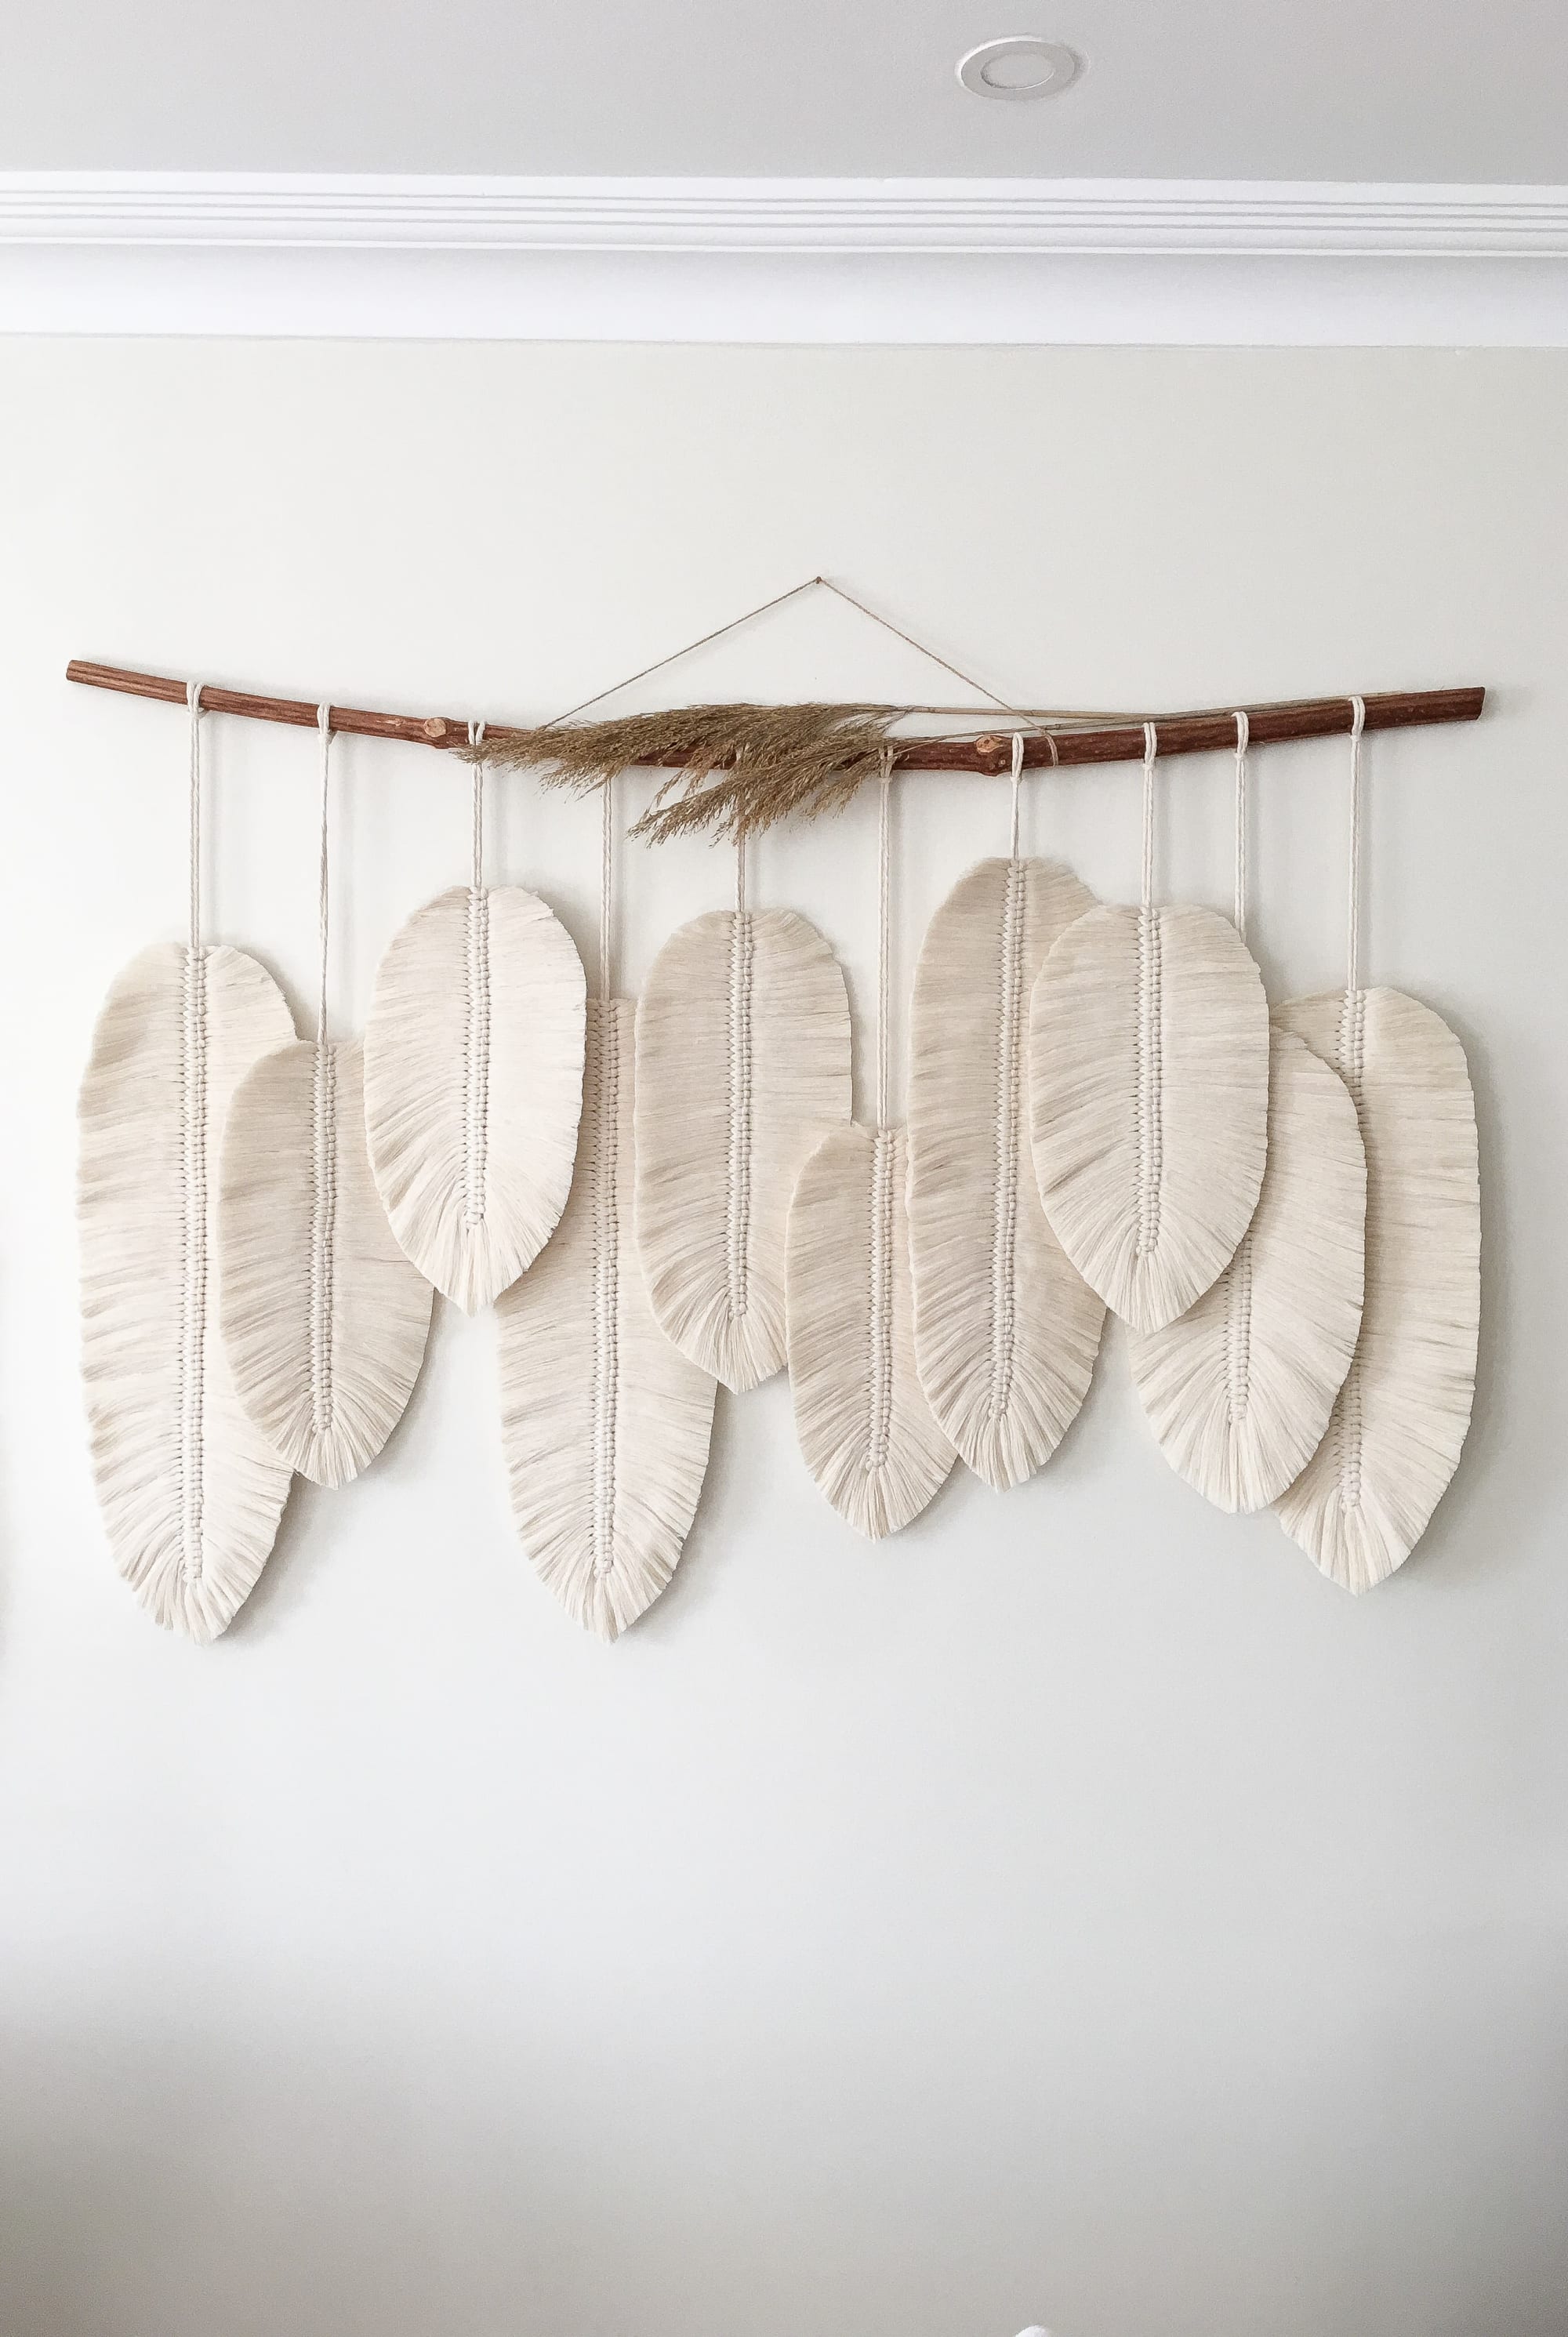 Large Macrame Feathers with 10 feathers